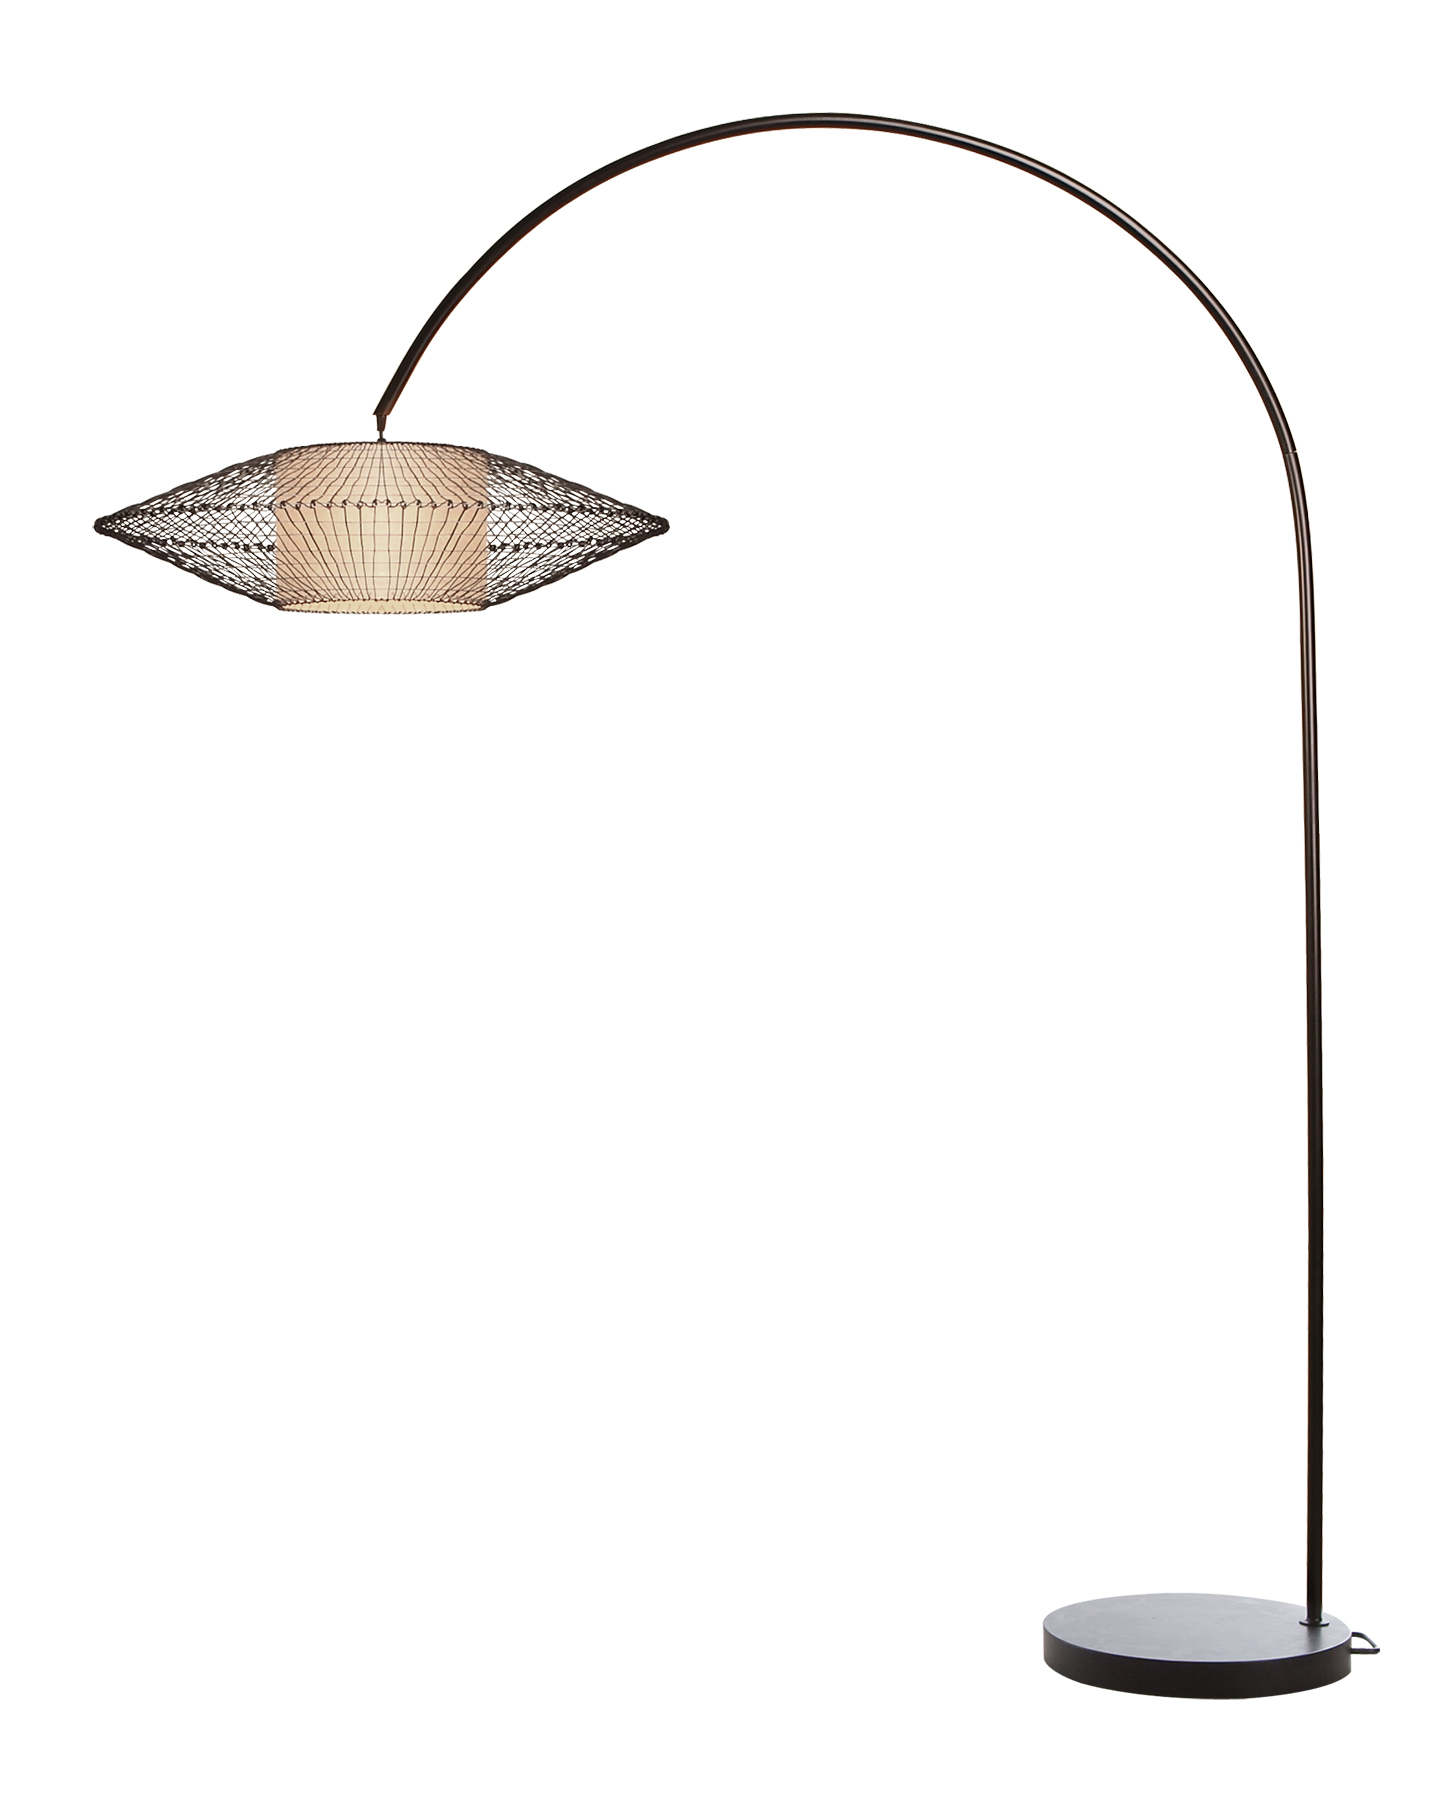 Red Arc Lamppacific Coast Basque Gold Lamp Black Floor Lamp with regard to proportions 1432 X 1800